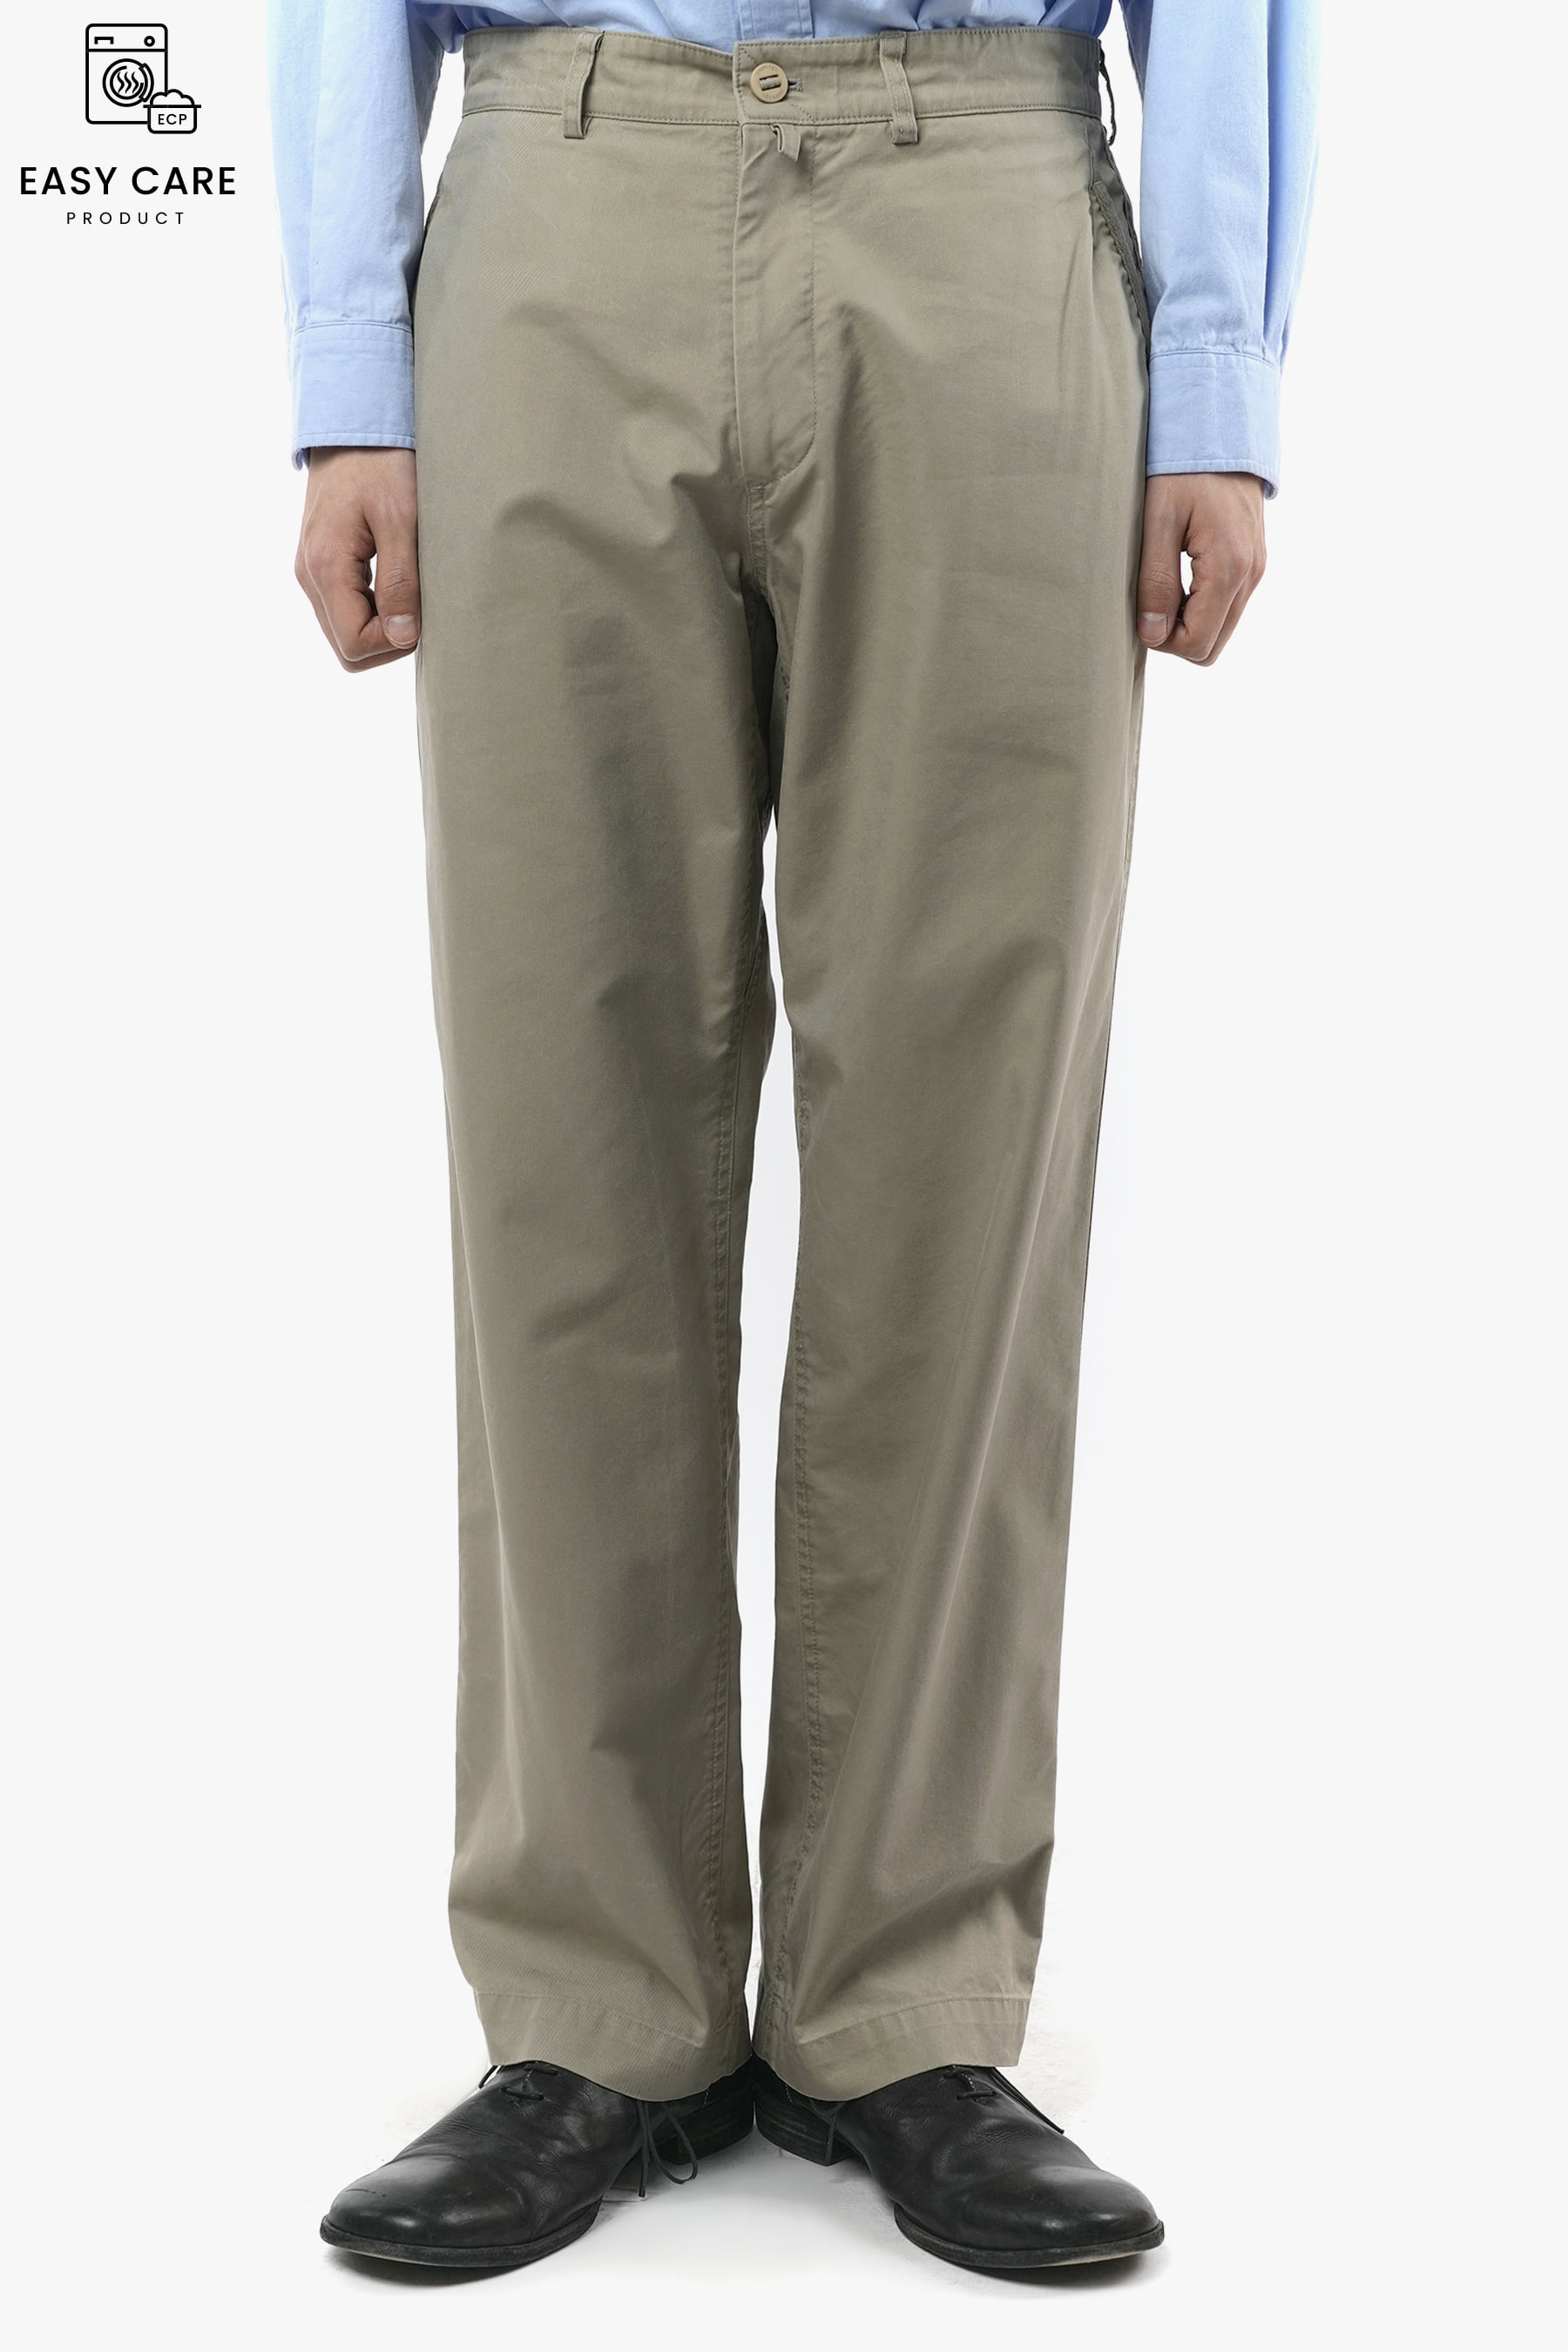 OYSTER Y-904 WASHED REGULAR CHINO PANTS (ECP GARMENT PROCESS)